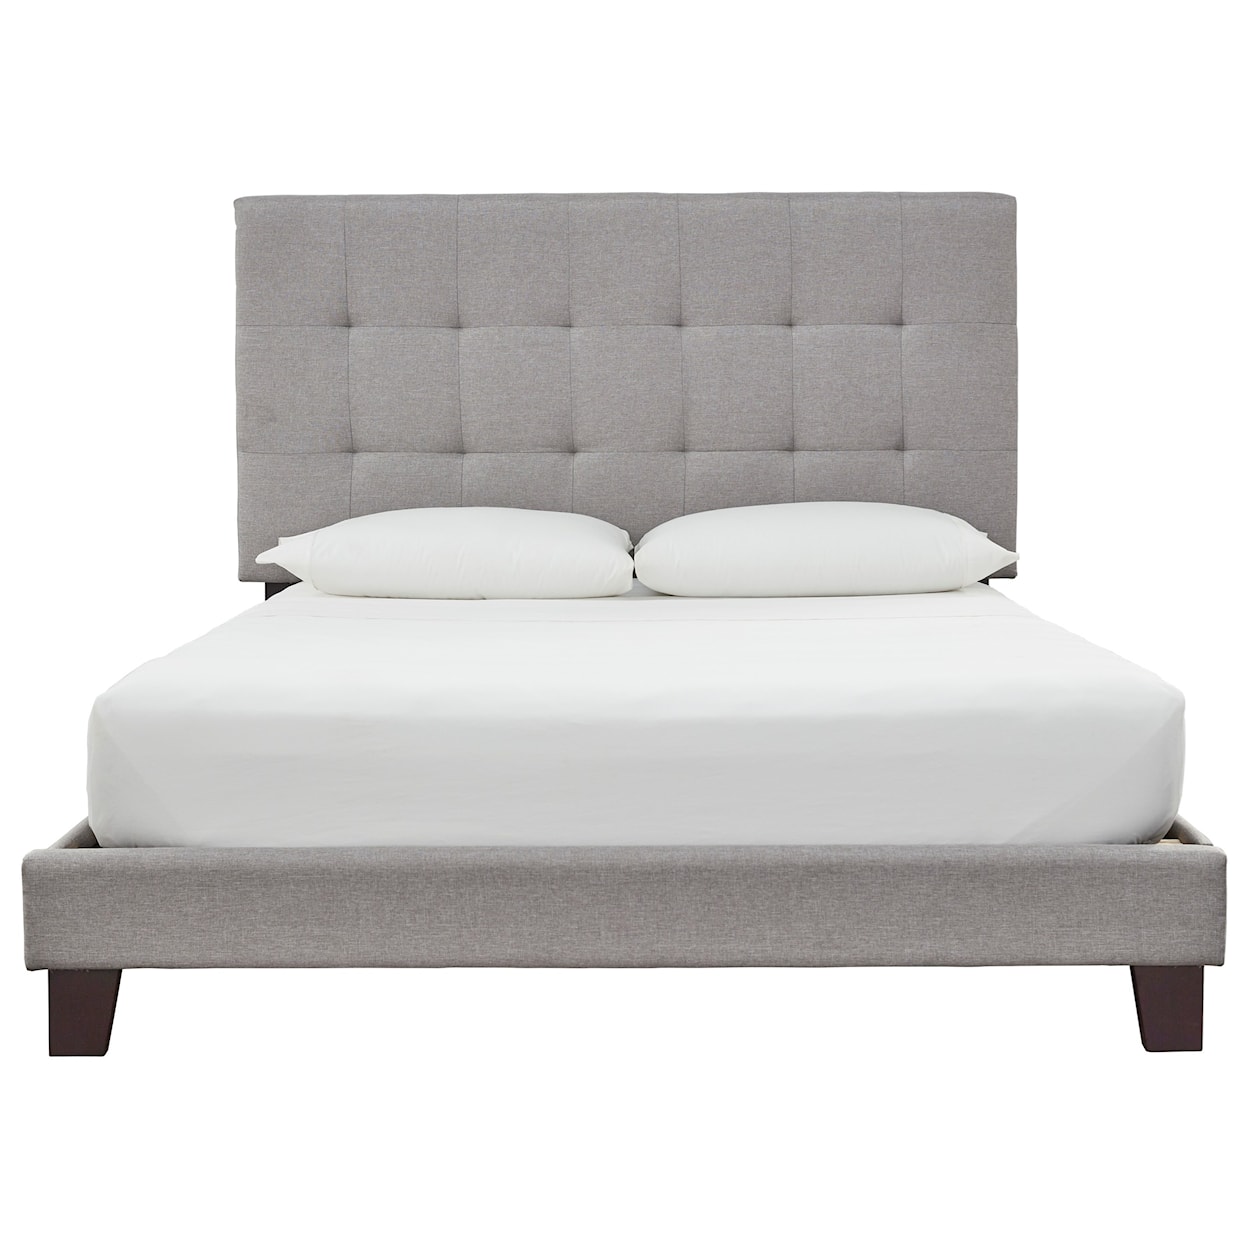 StyleLine Adelloni Queen Upholstered Bed